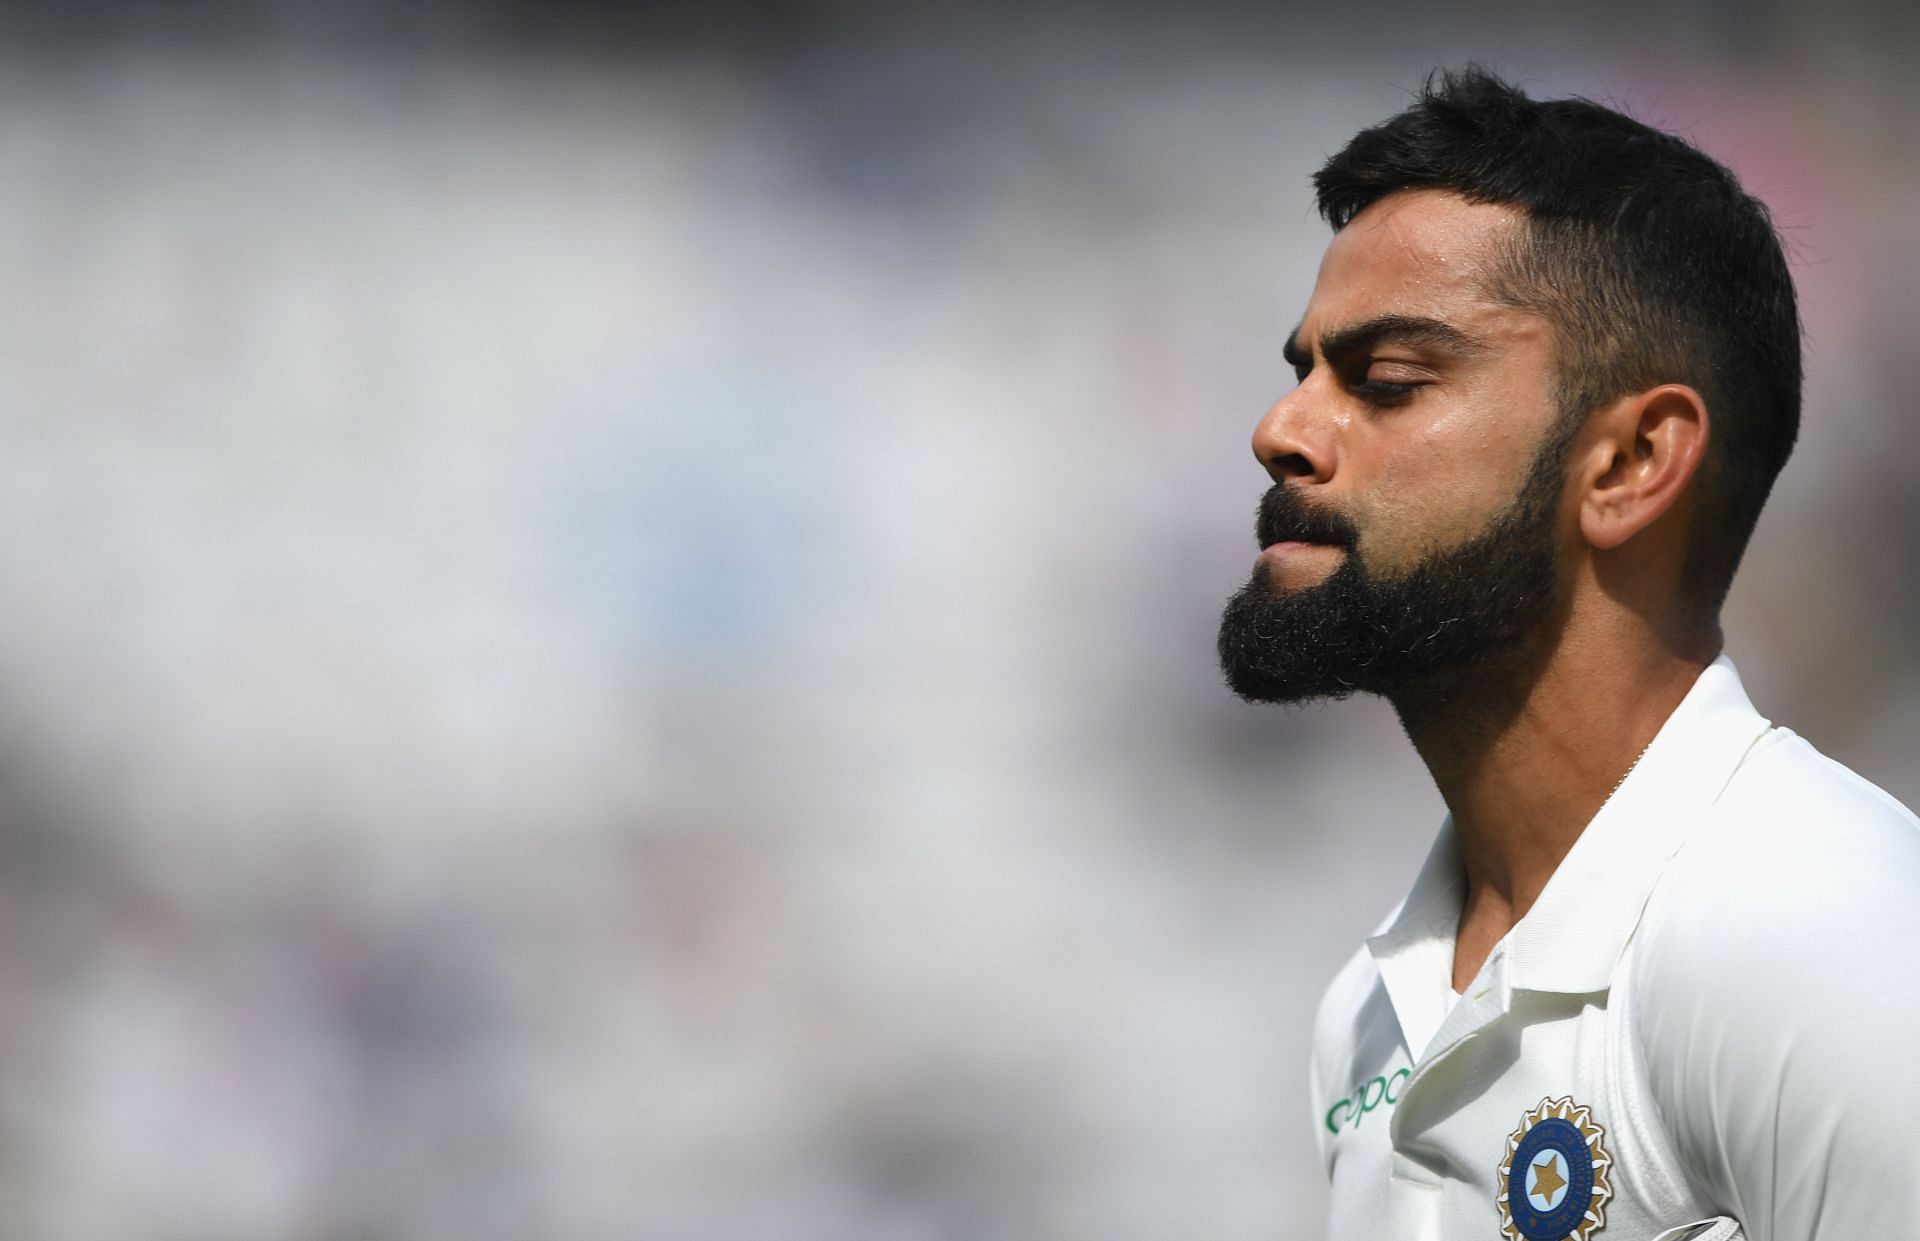 Social media is buzzing with Kohli missing a hundred